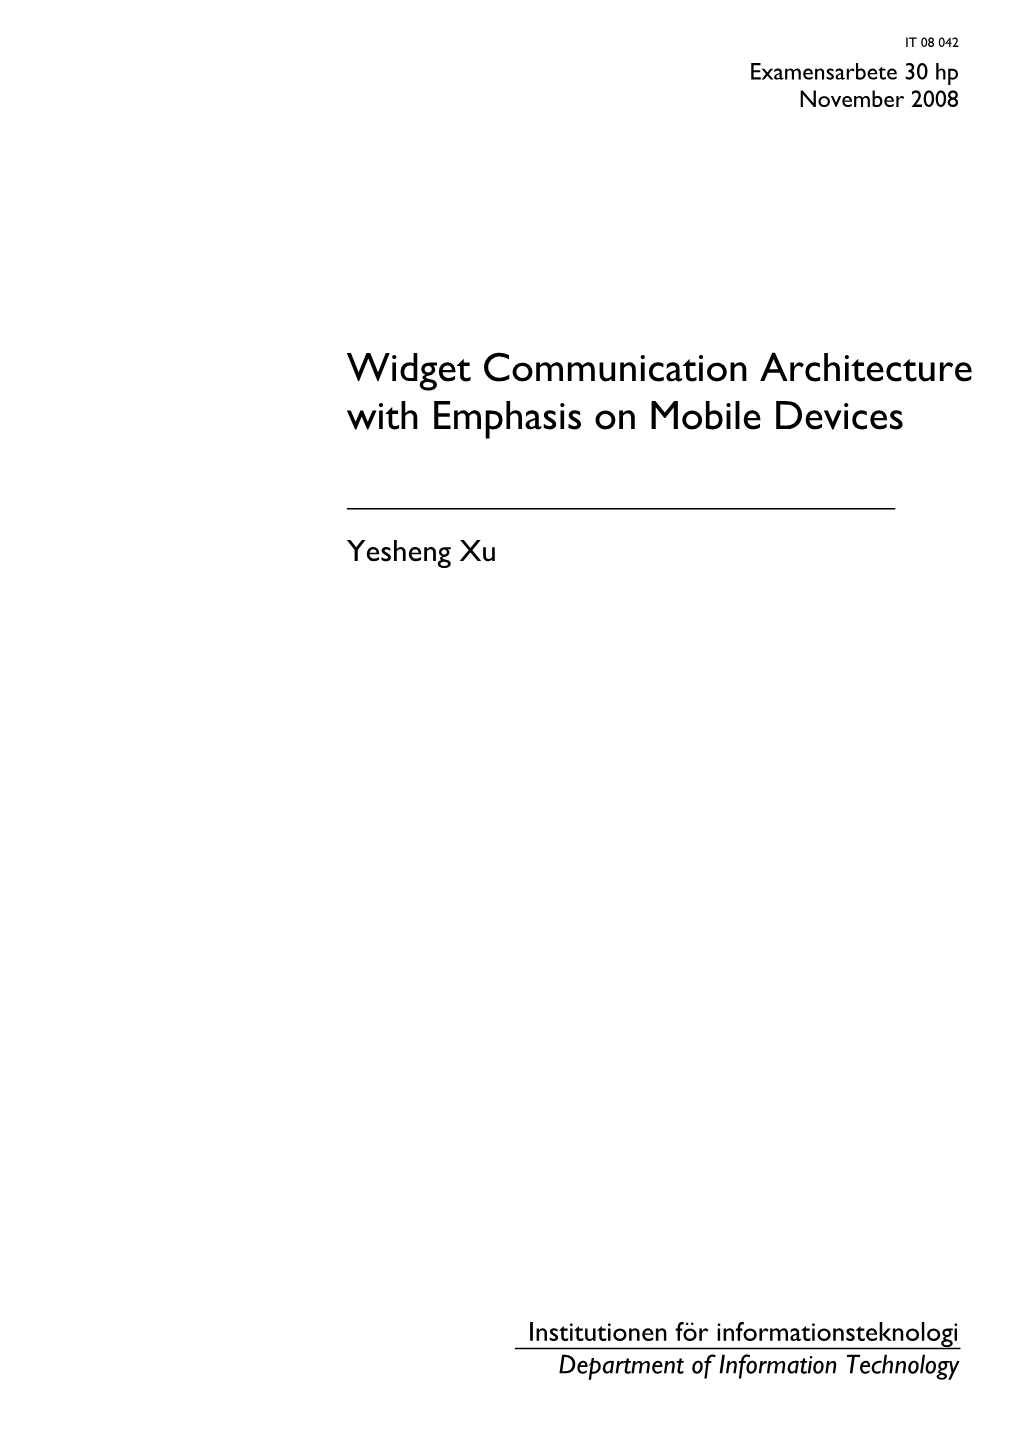 Widget Communication Architecture with Emphasis on Mobile Devices